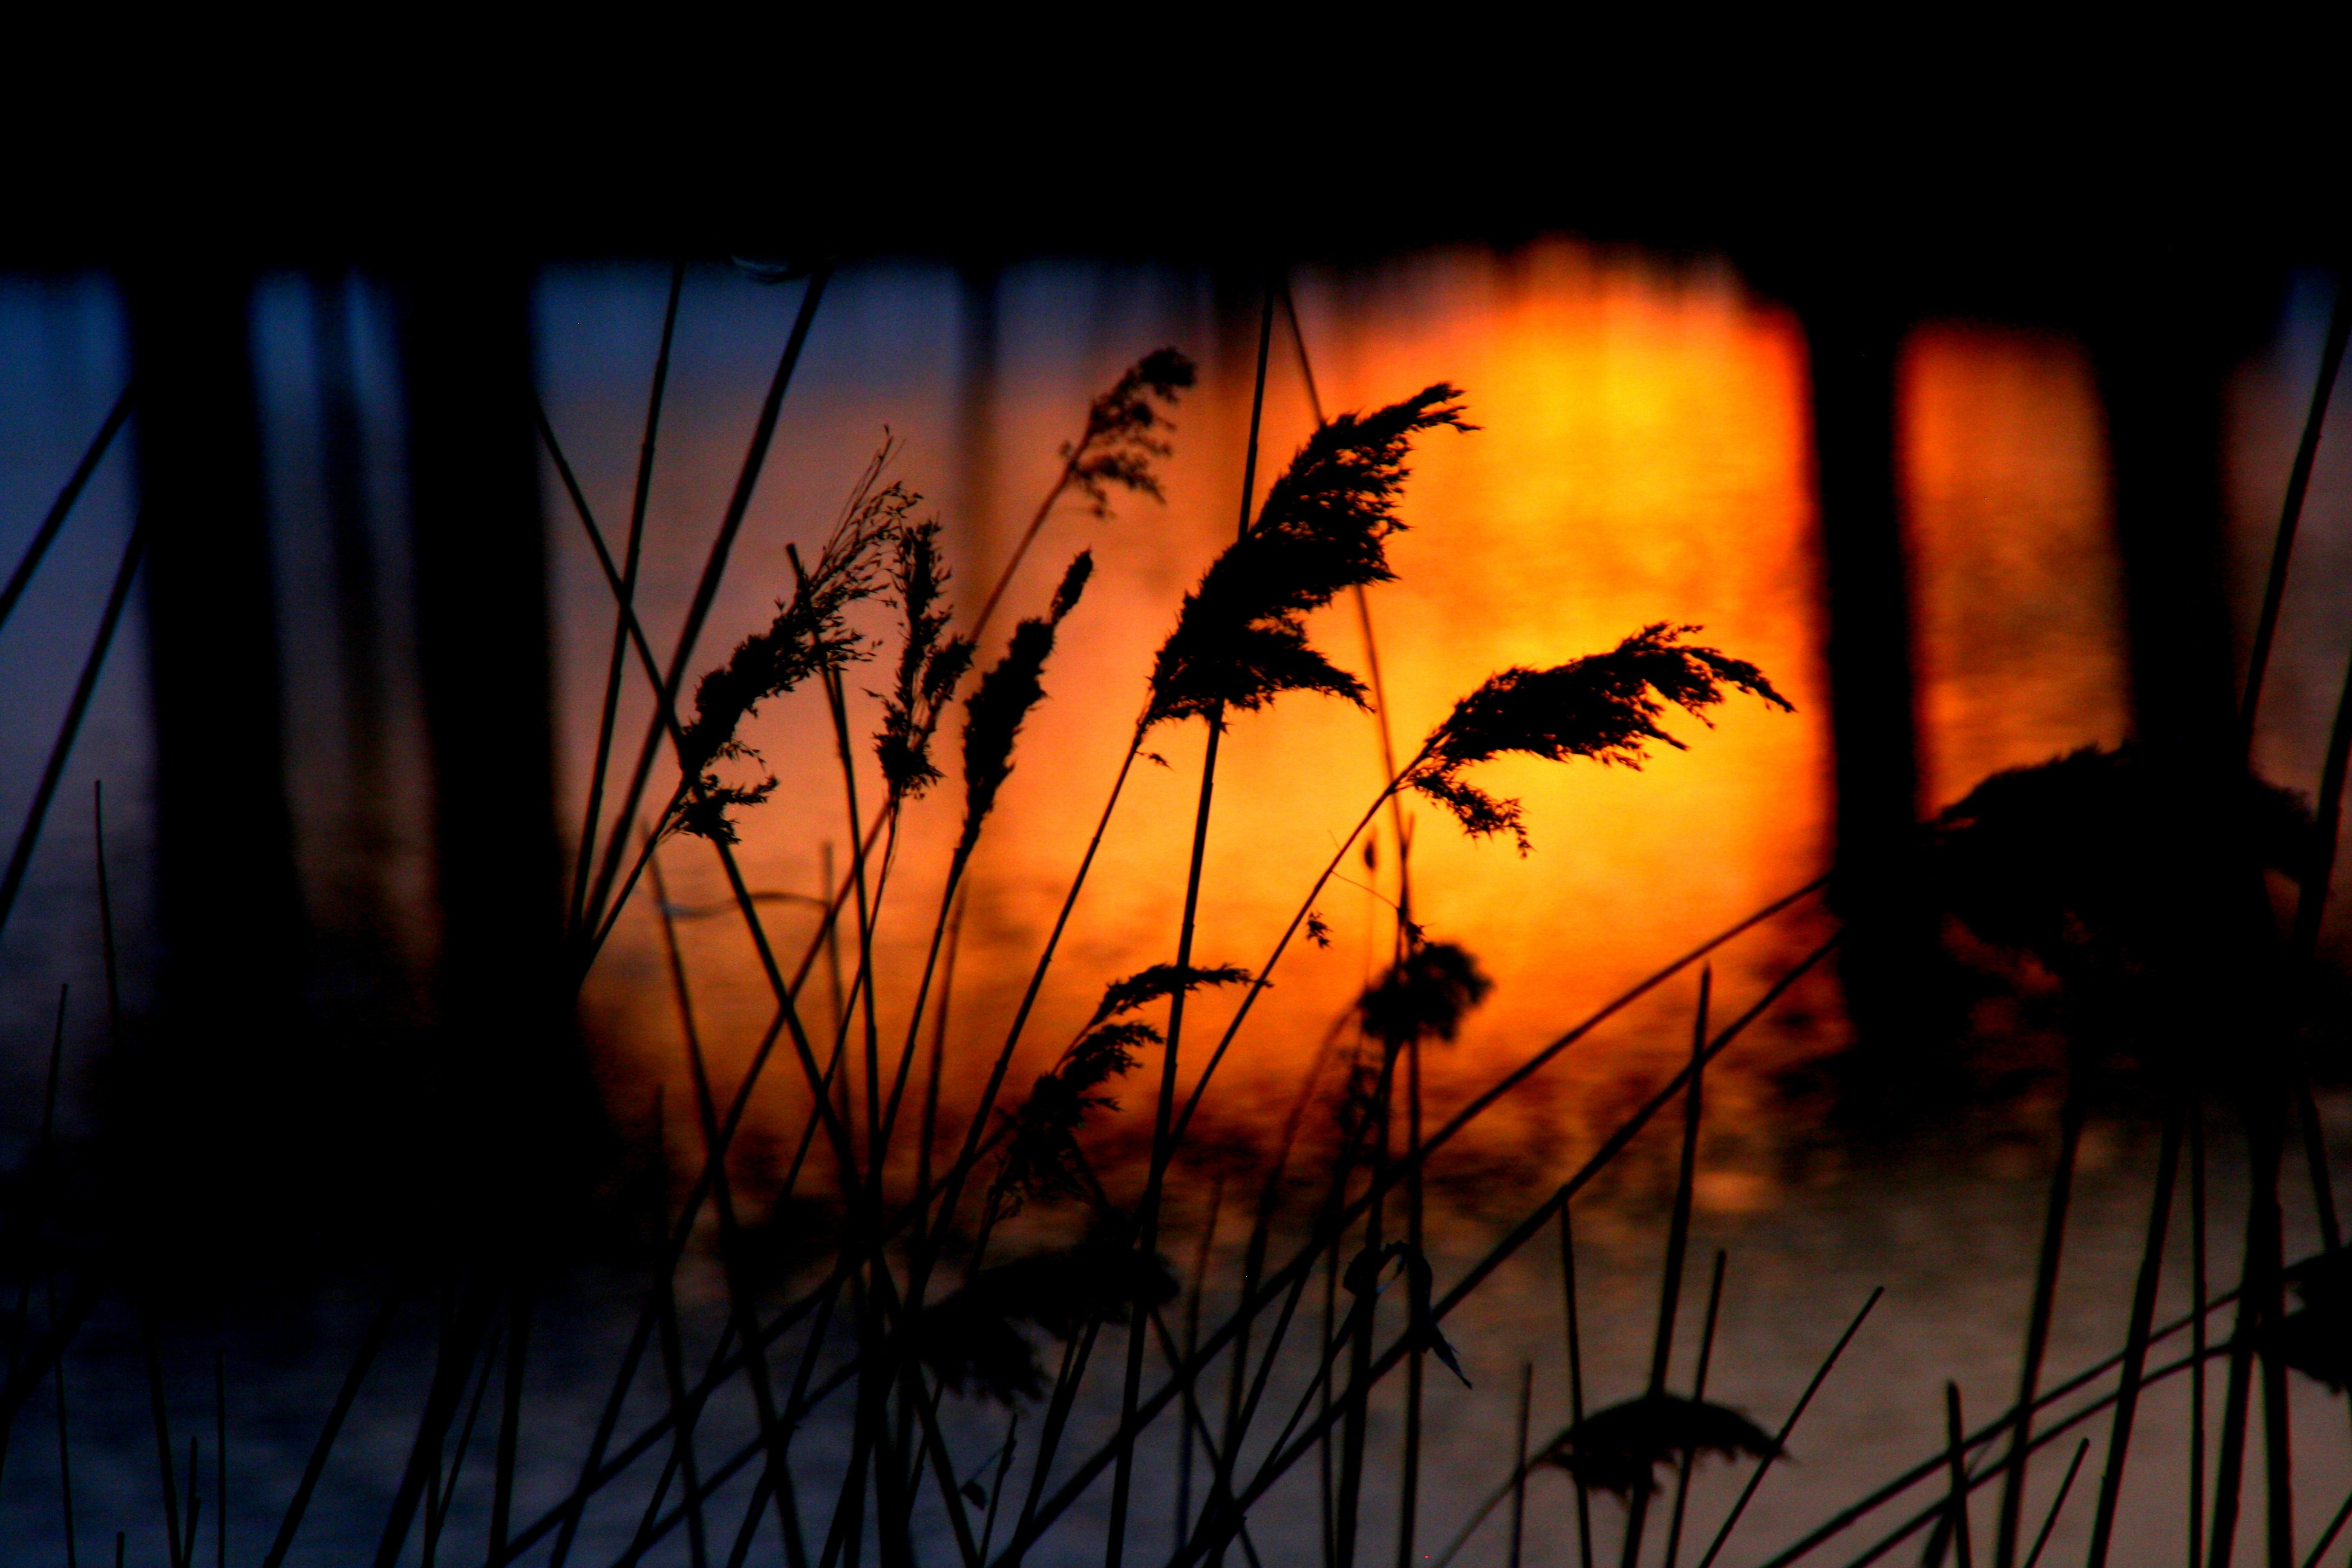 Water, Reflection, Sunset, Orange, Cane, silhouette, plant